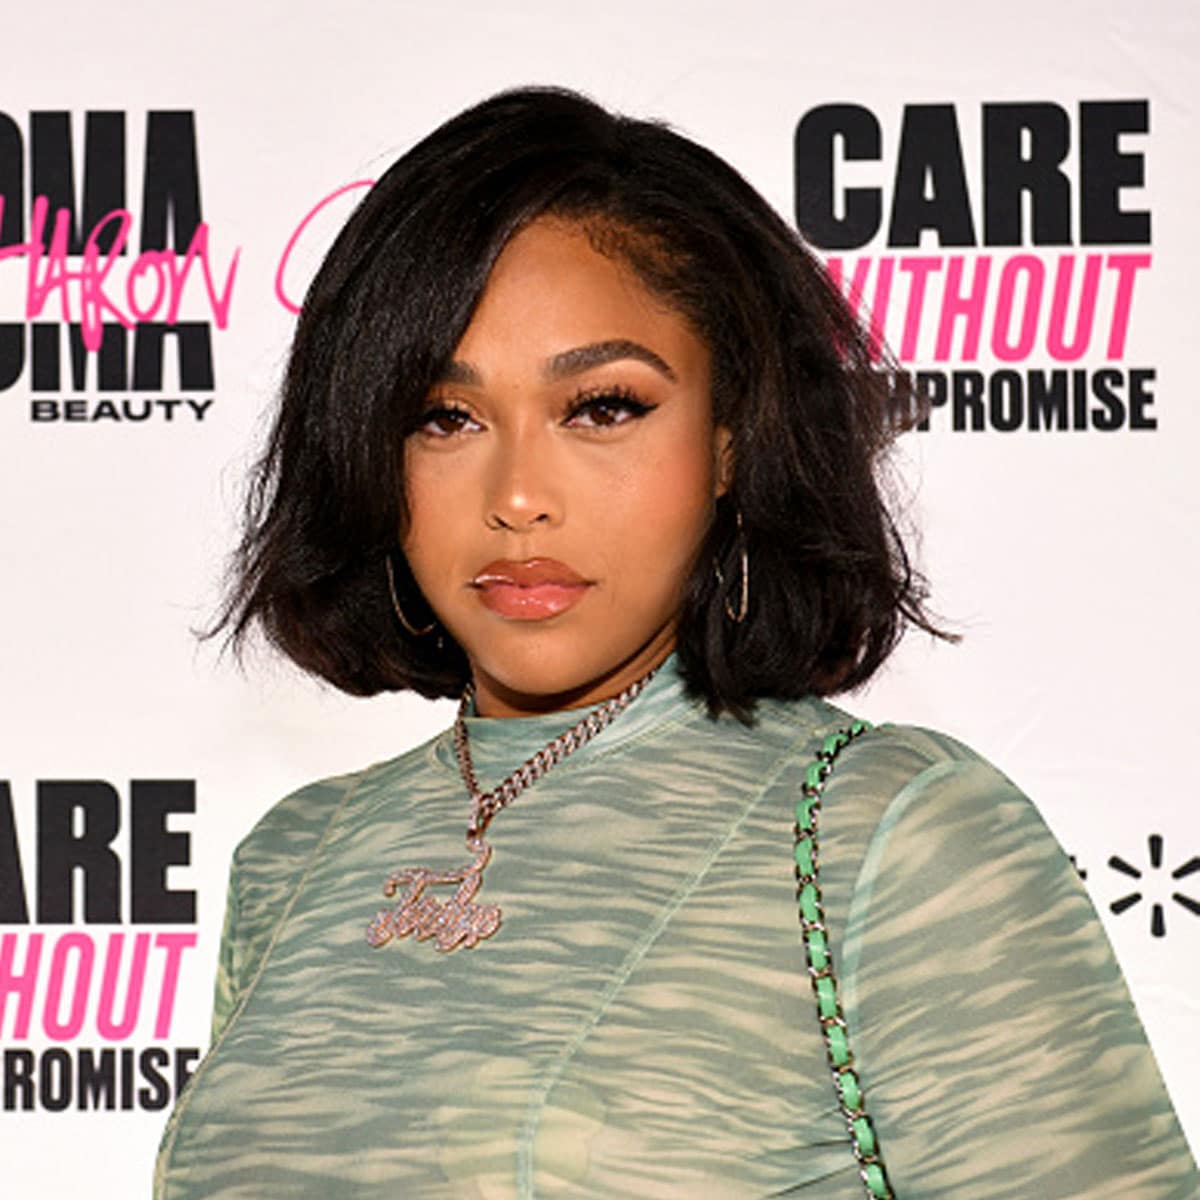 Jordyn Woods attends UOMA Pride Month and Juneteenth Celebration launch event